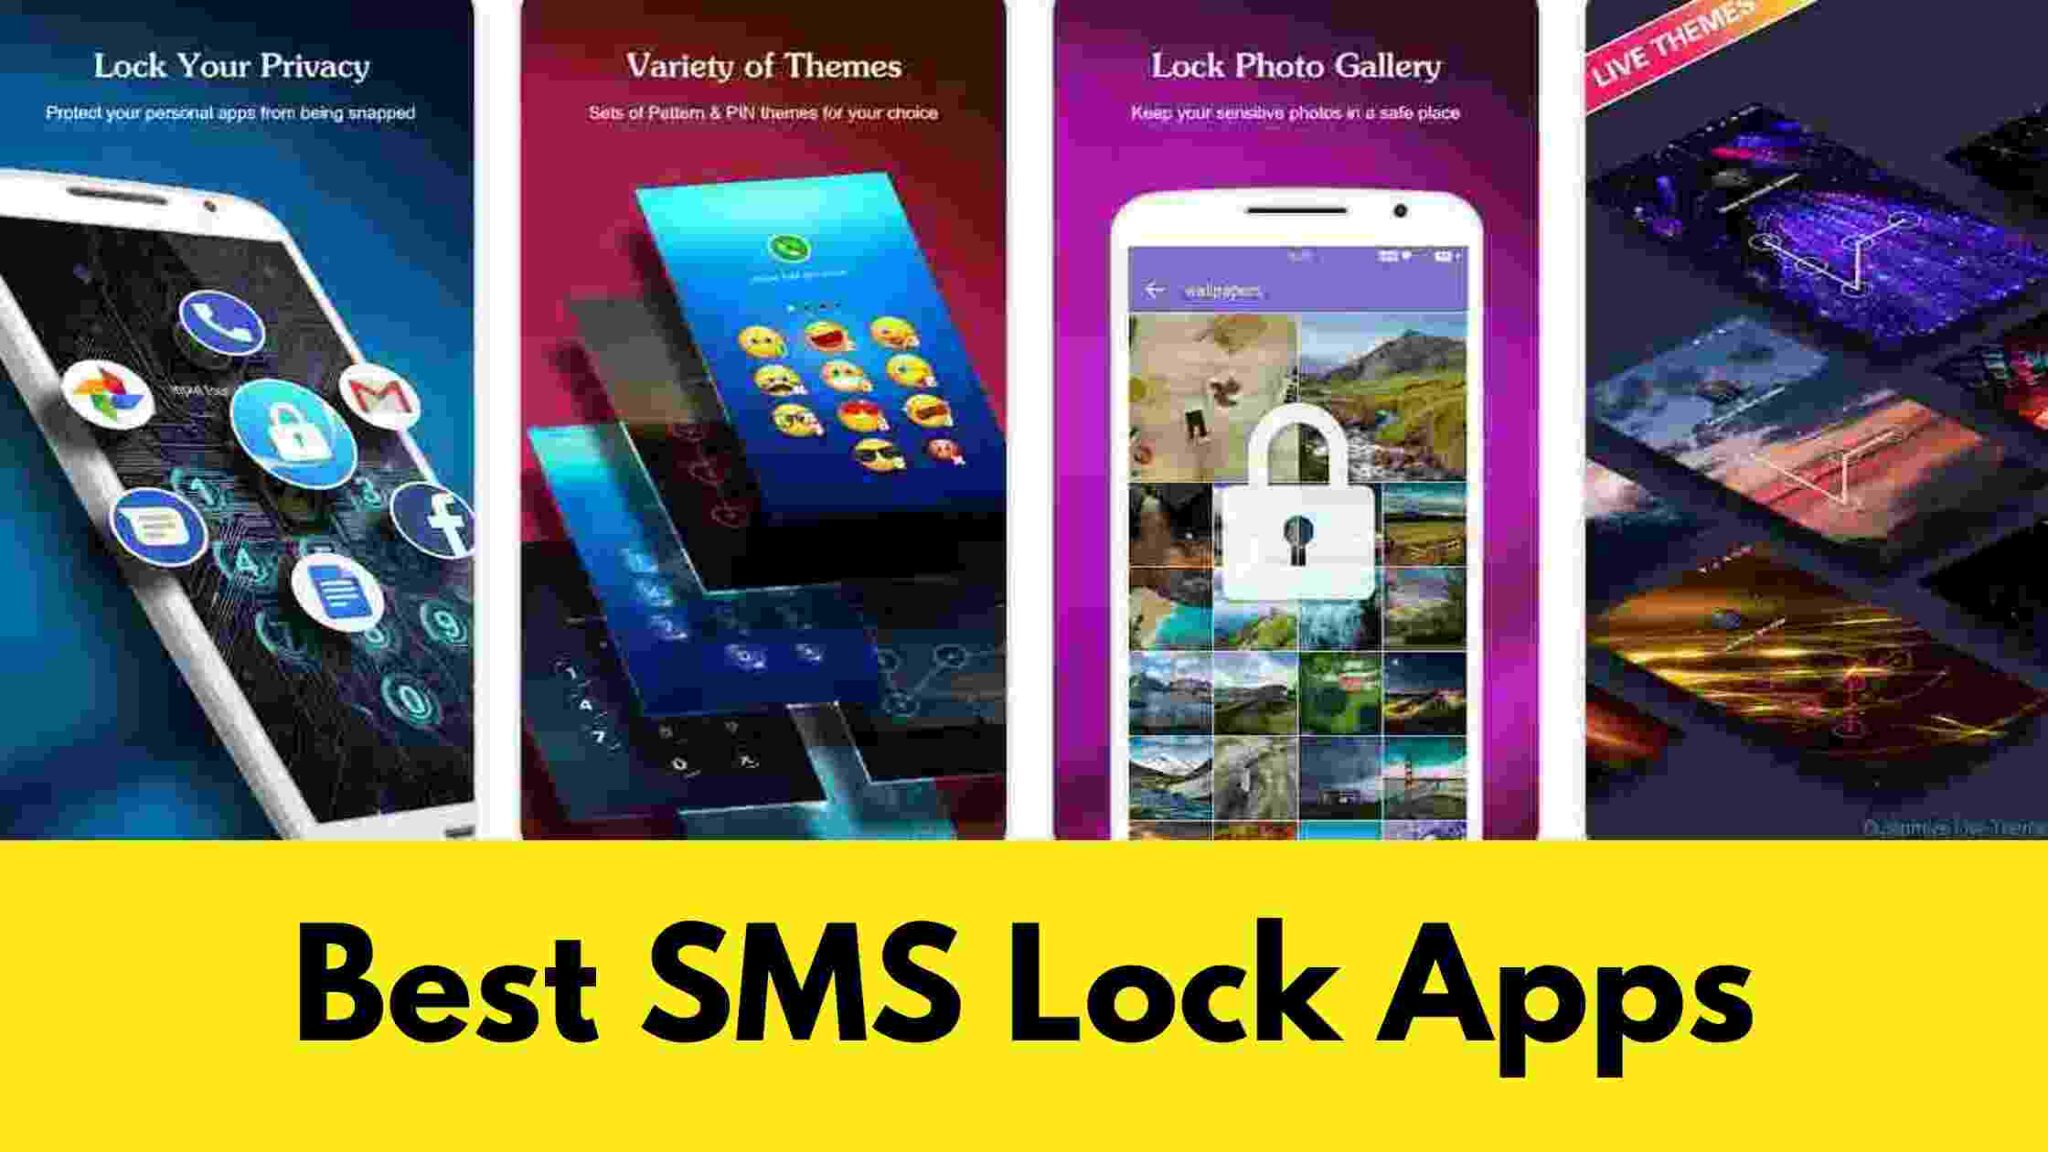 SMS lock apps